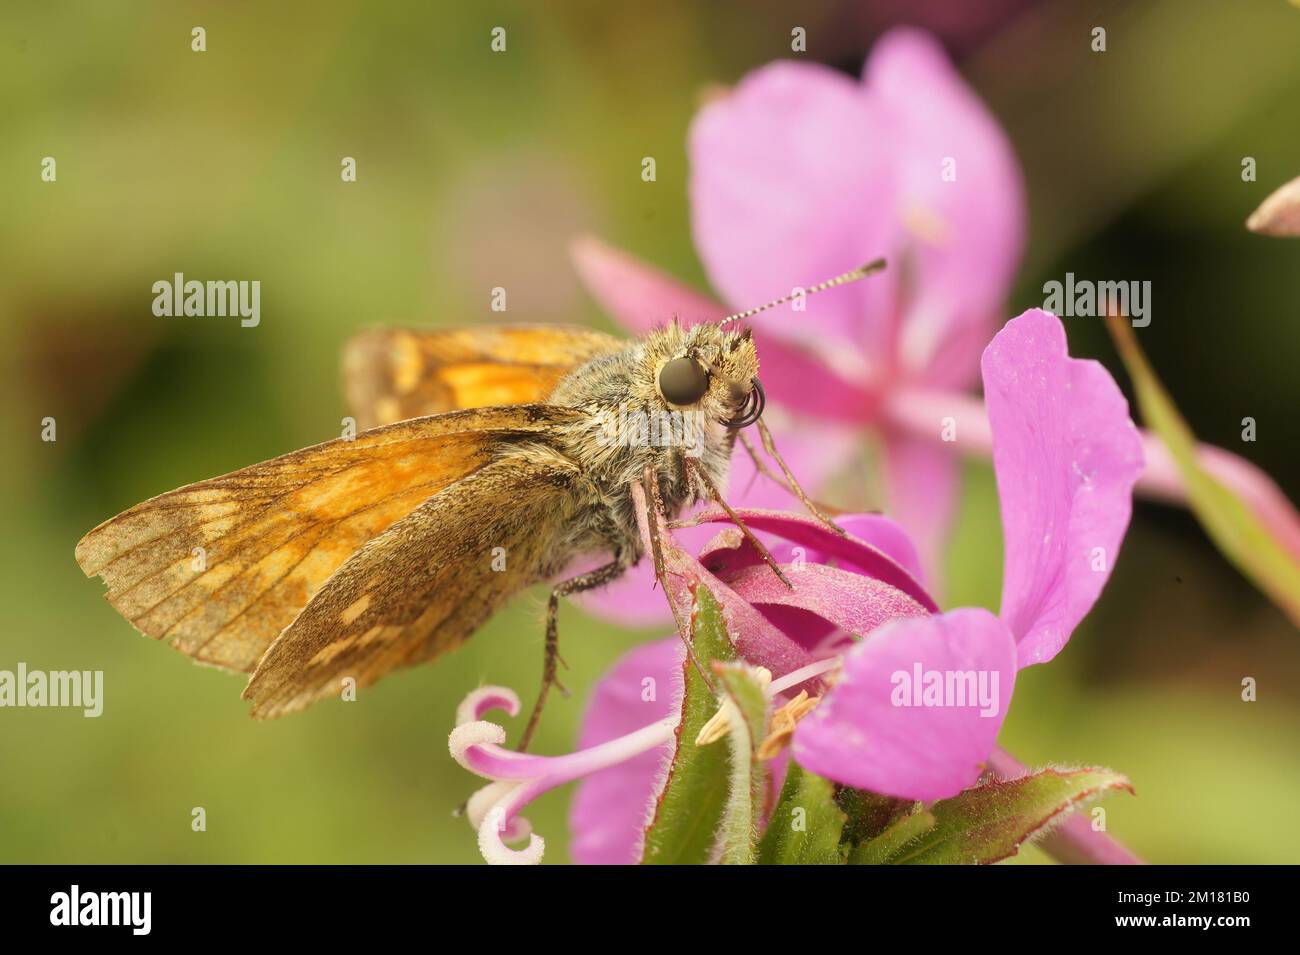 Natural closeup on a Large skipper butterfly, Ochlodes sylvanus, sitting on a pink flower in the garden Stock Photo